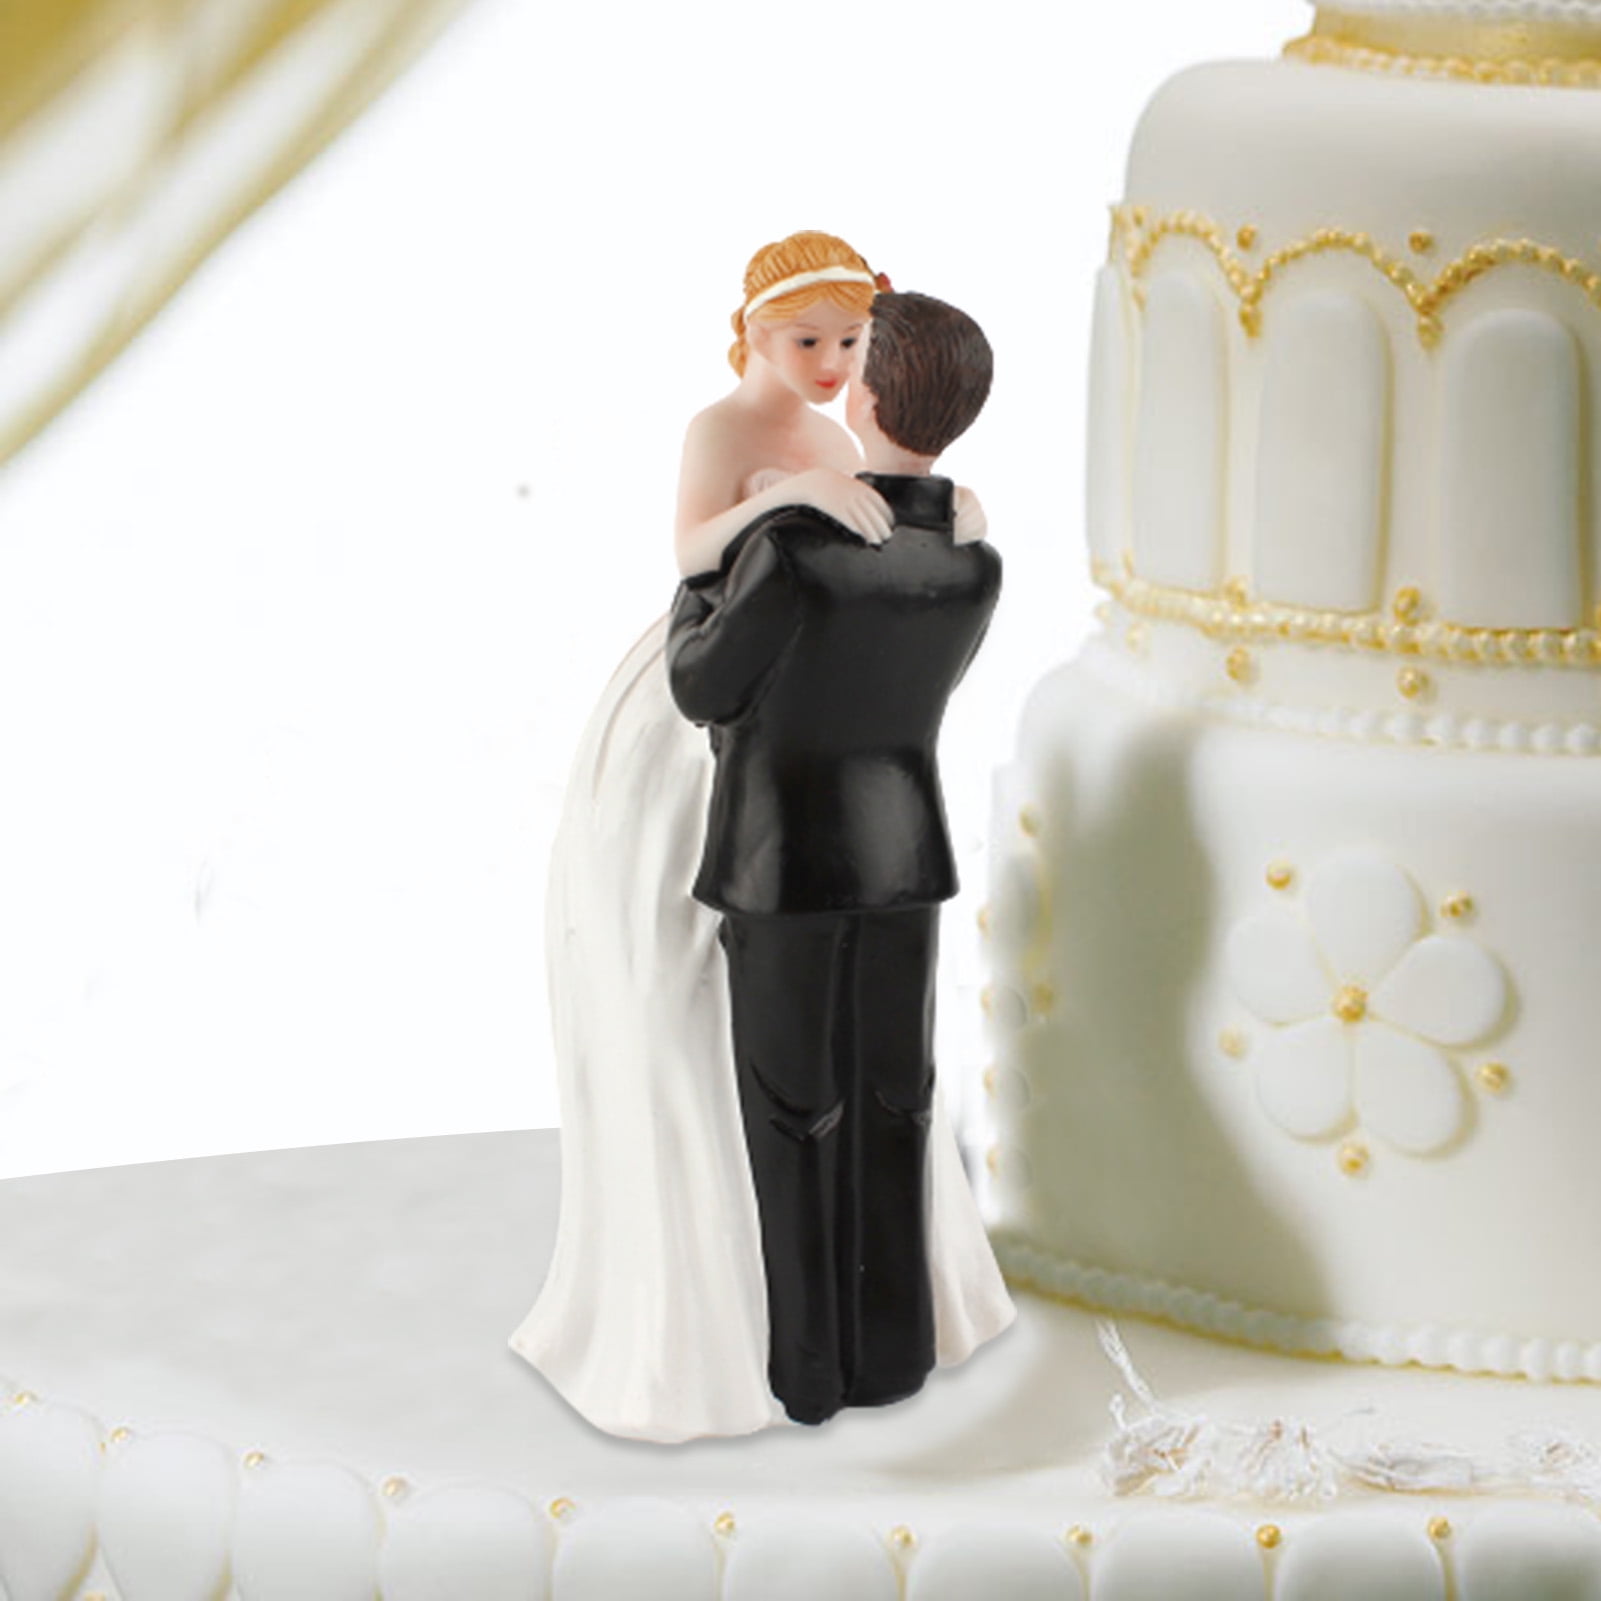 Bride and Groom Wedding Cake Topper Figurine Gift Decoration 